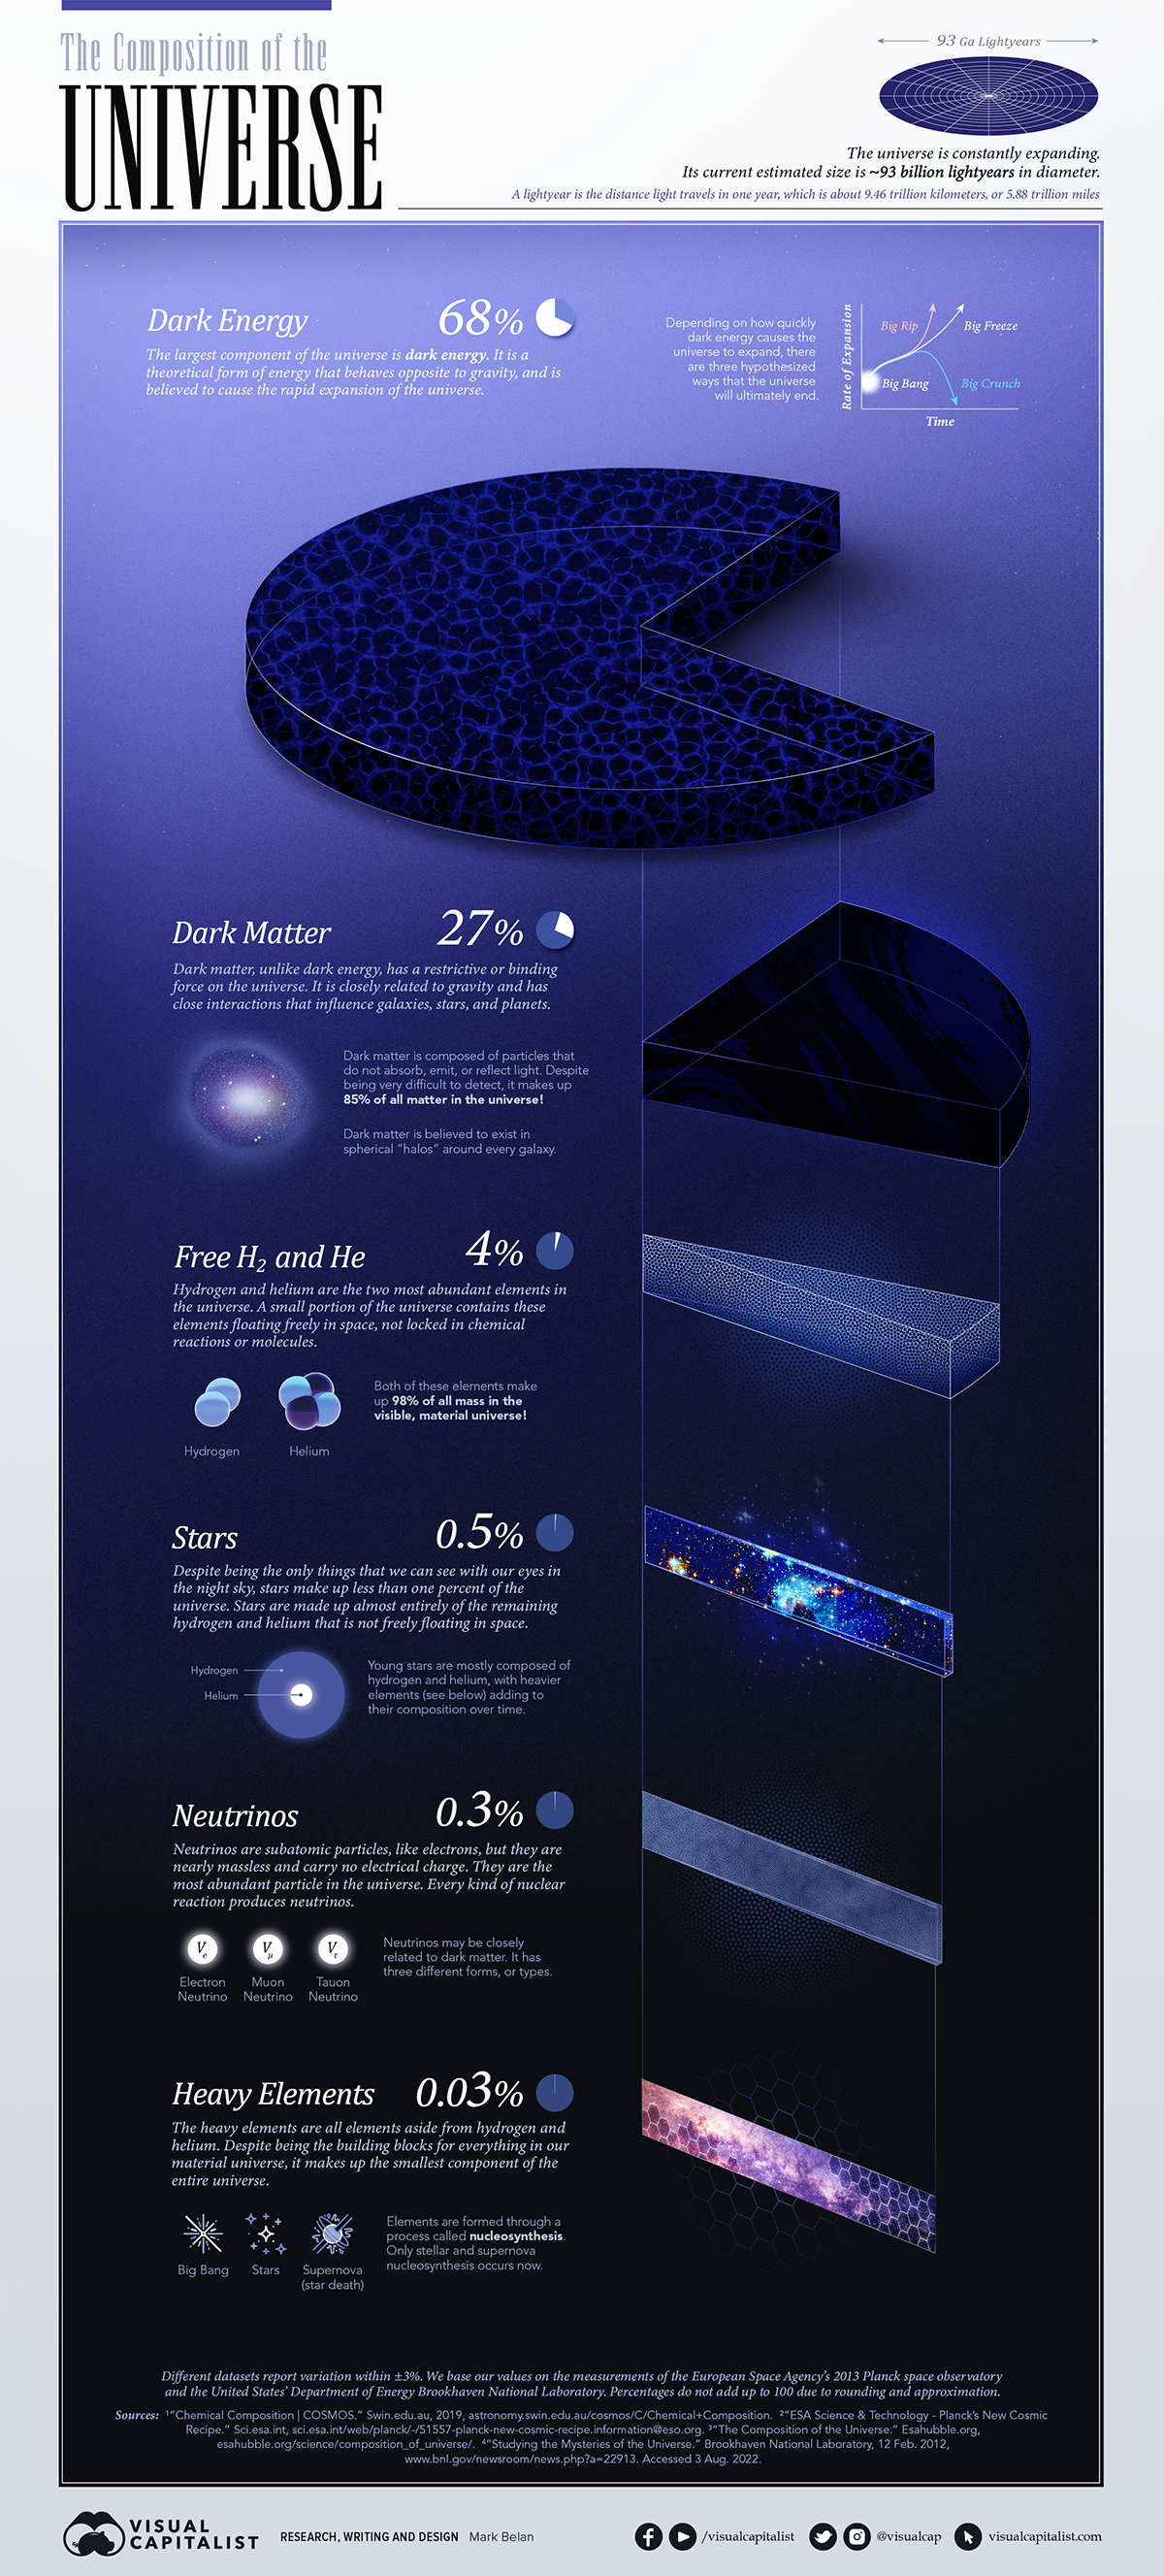 Infographic showing the composition of the universe